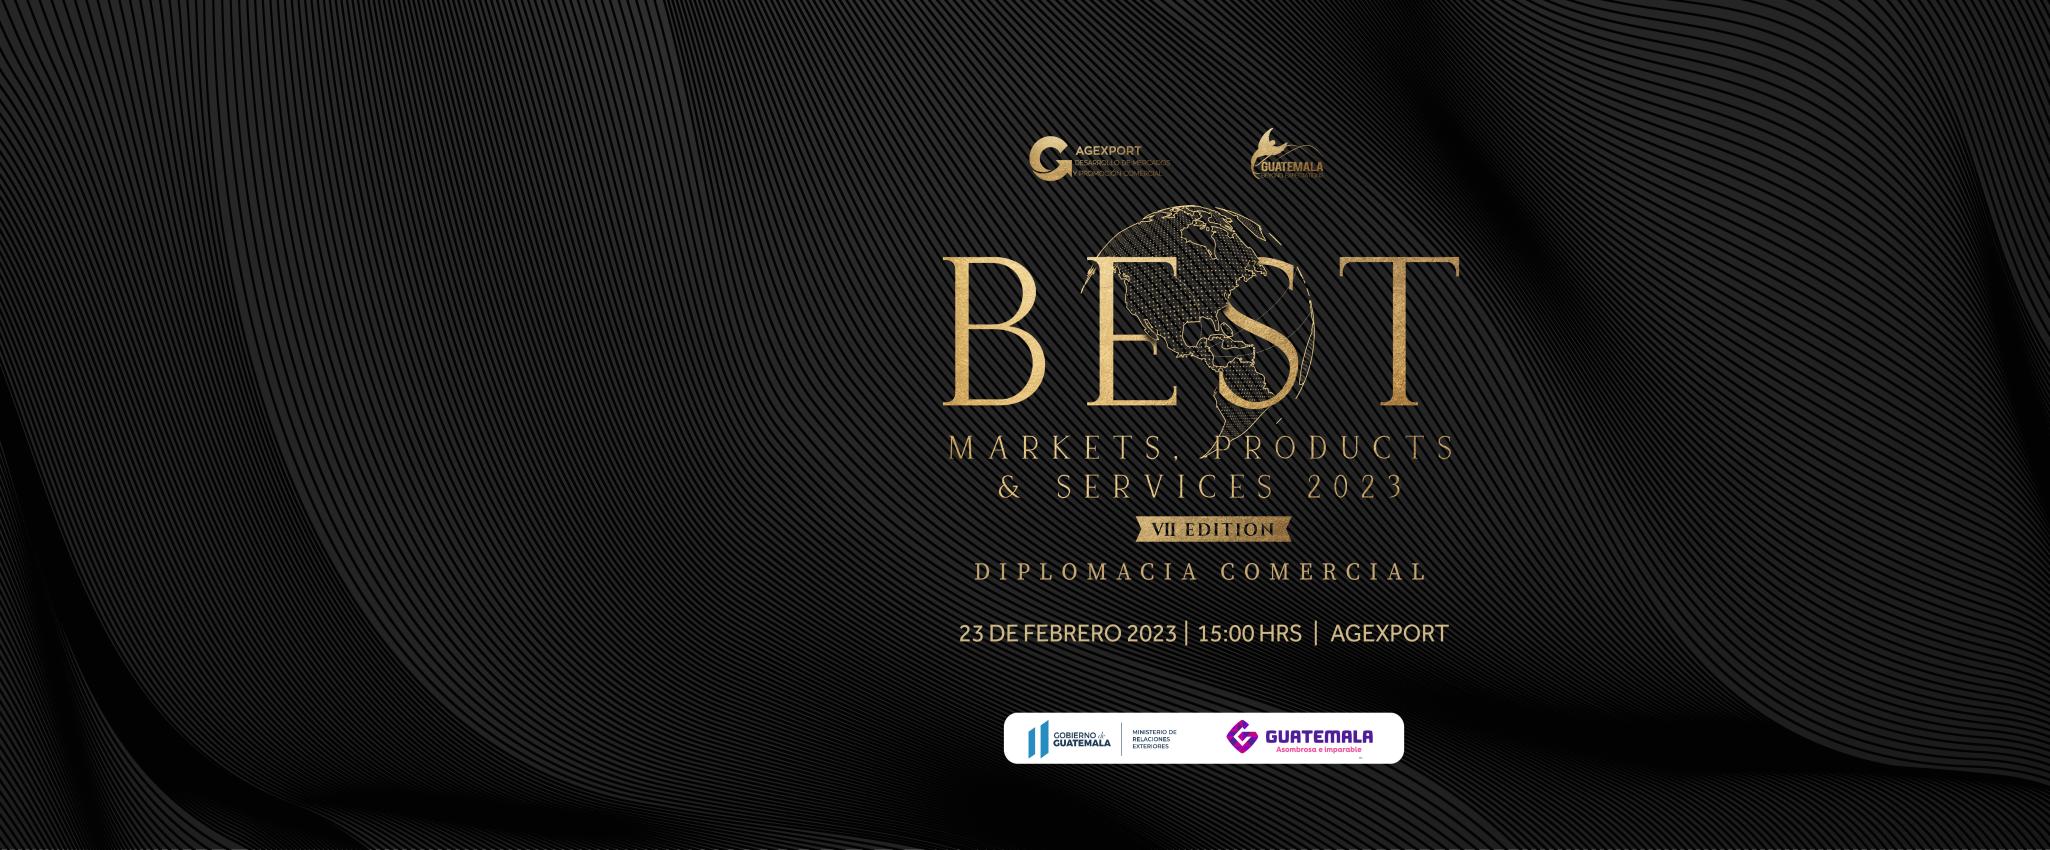 Best markets products and services.